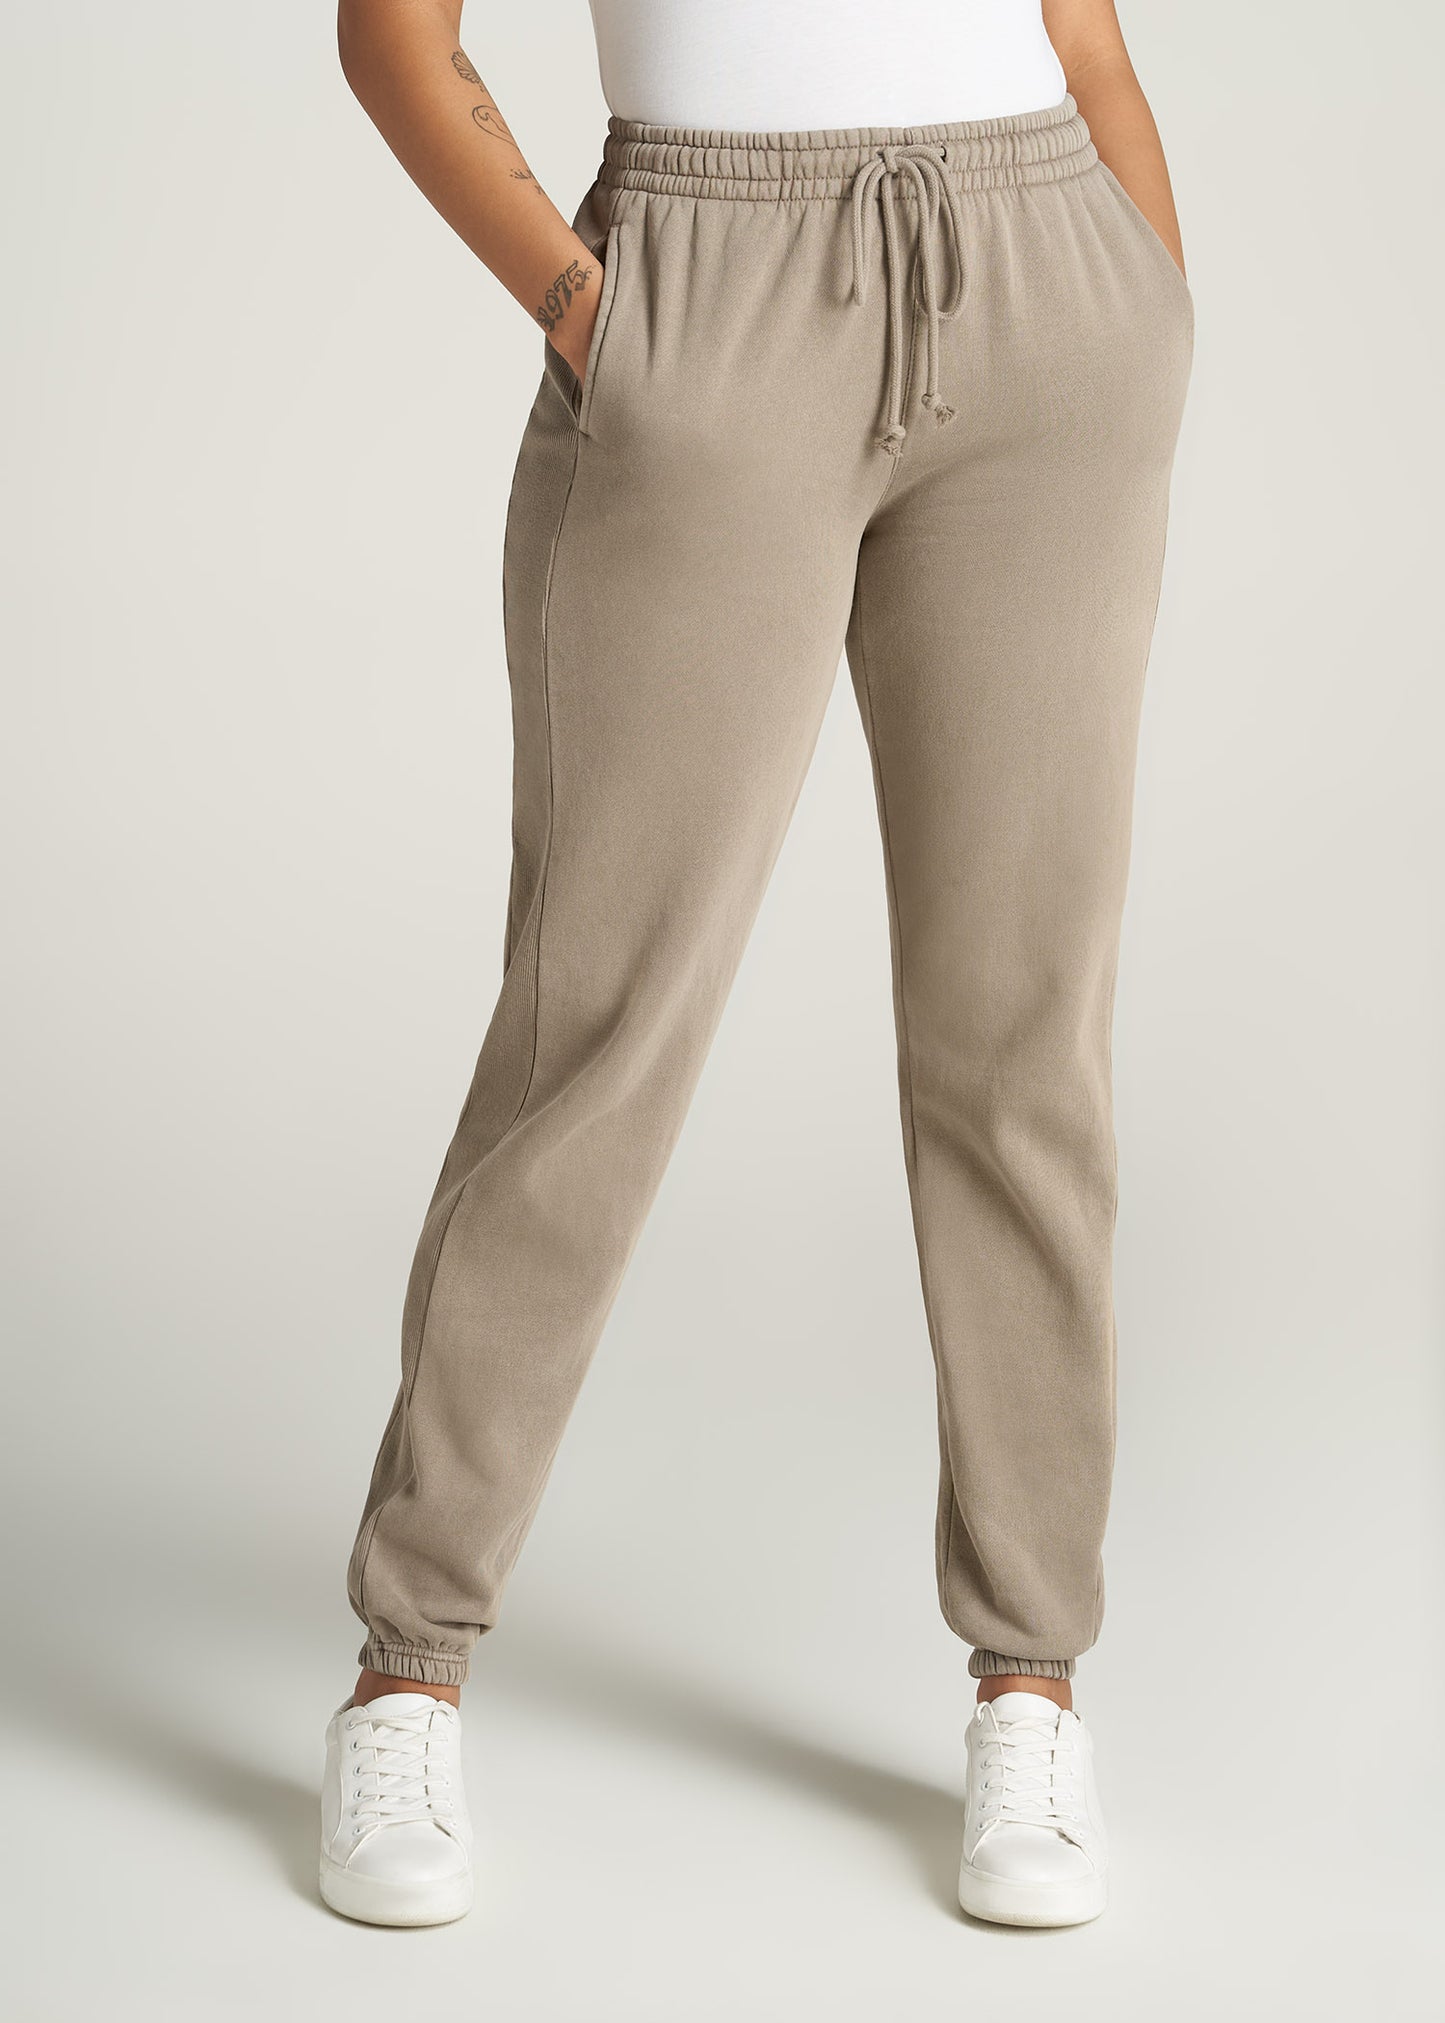 Old Navy | Pants & Jumpsuits | Nwt Highwaisted Gray Ogc Chino Pants For  Women Small Tall | Poshmark